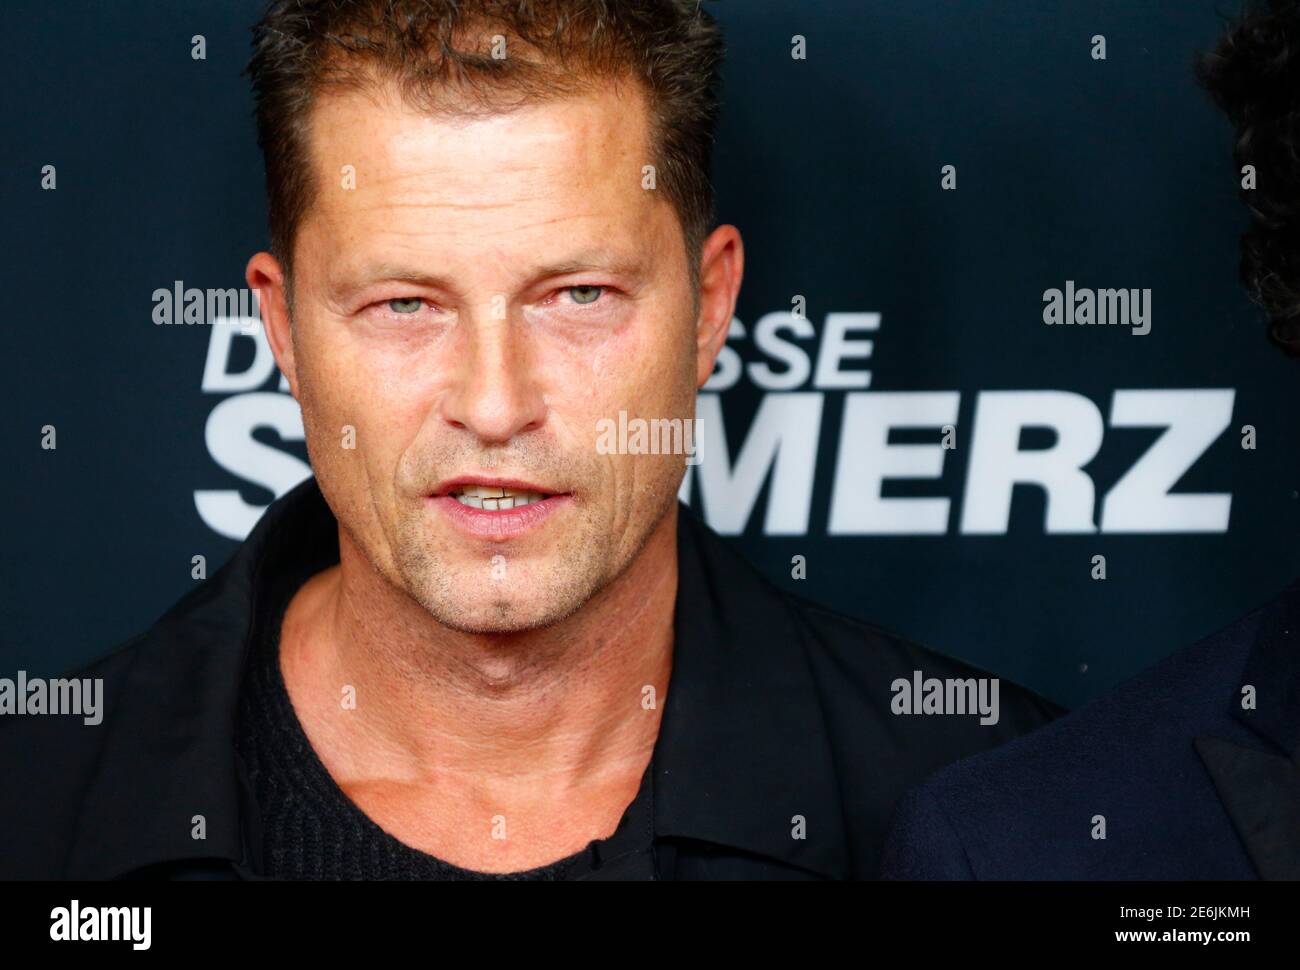 Actor Til Schweiger arrives at the red carpet for the premiere of his new Tatort movie 'Der grosse Schmerz' (The Big Pain) at the cinema Babylon in Berlin, Germany December 16, 2015.   REUTERS/Hannibal Hanschke Stock Photo